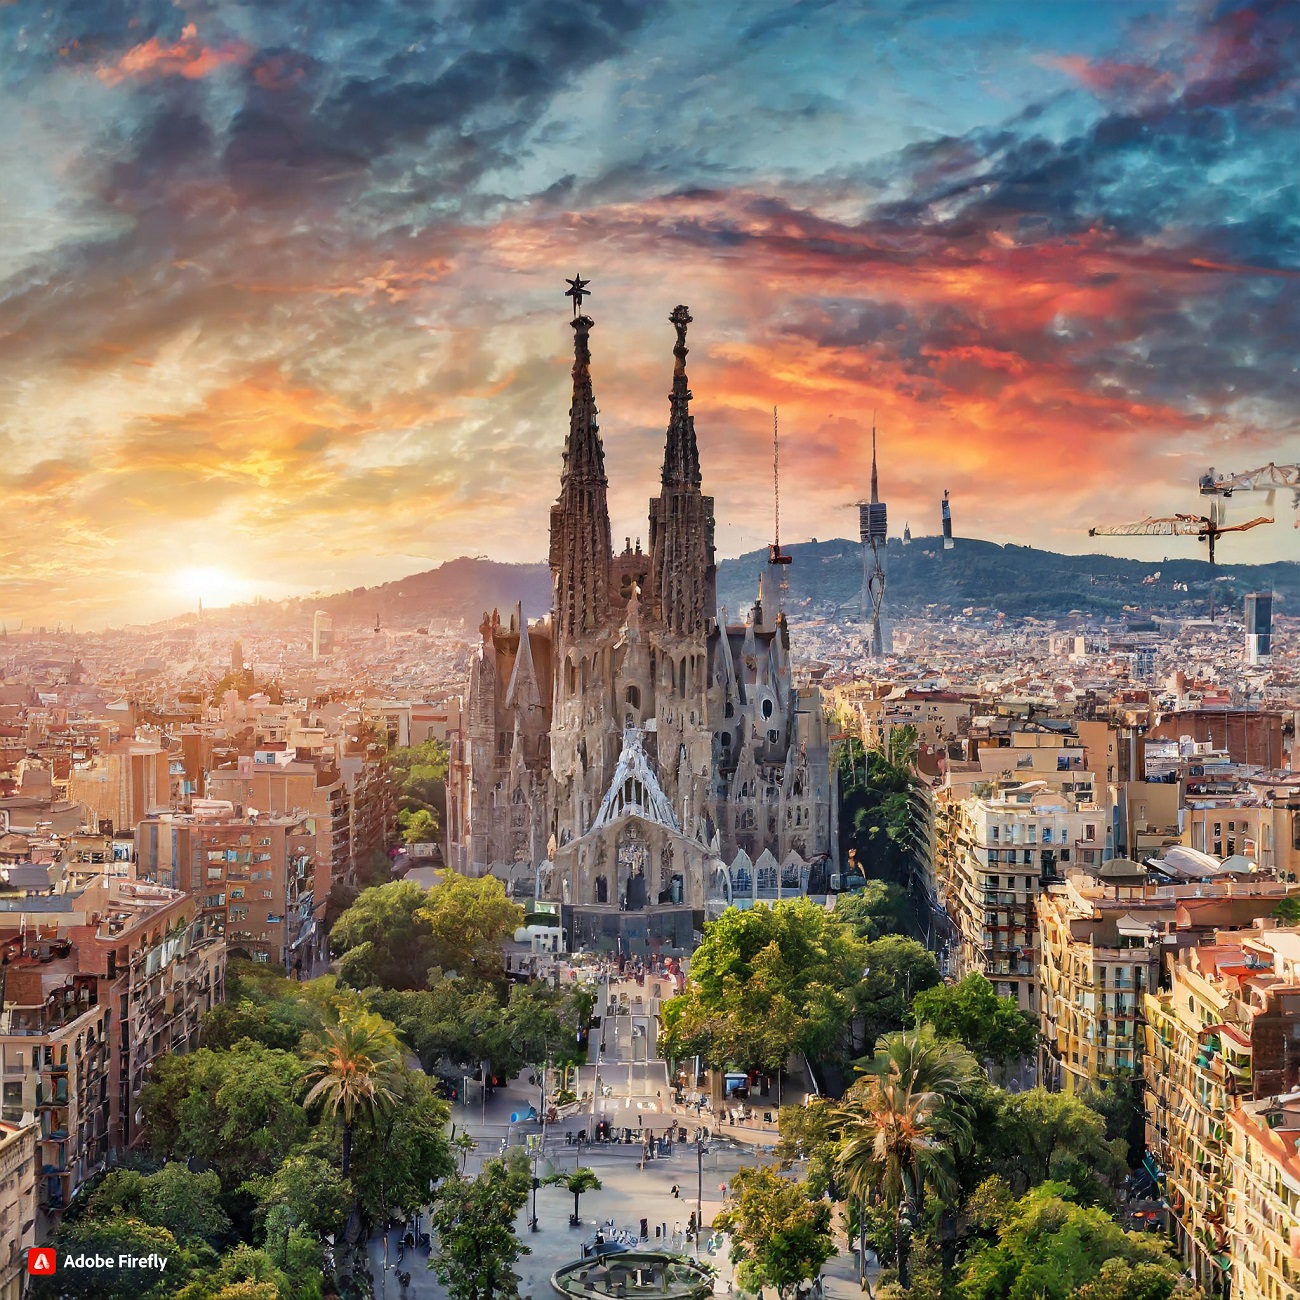 Firefly Barcelona Spain with La Sagrada in the center with a sunset 42231.jpg